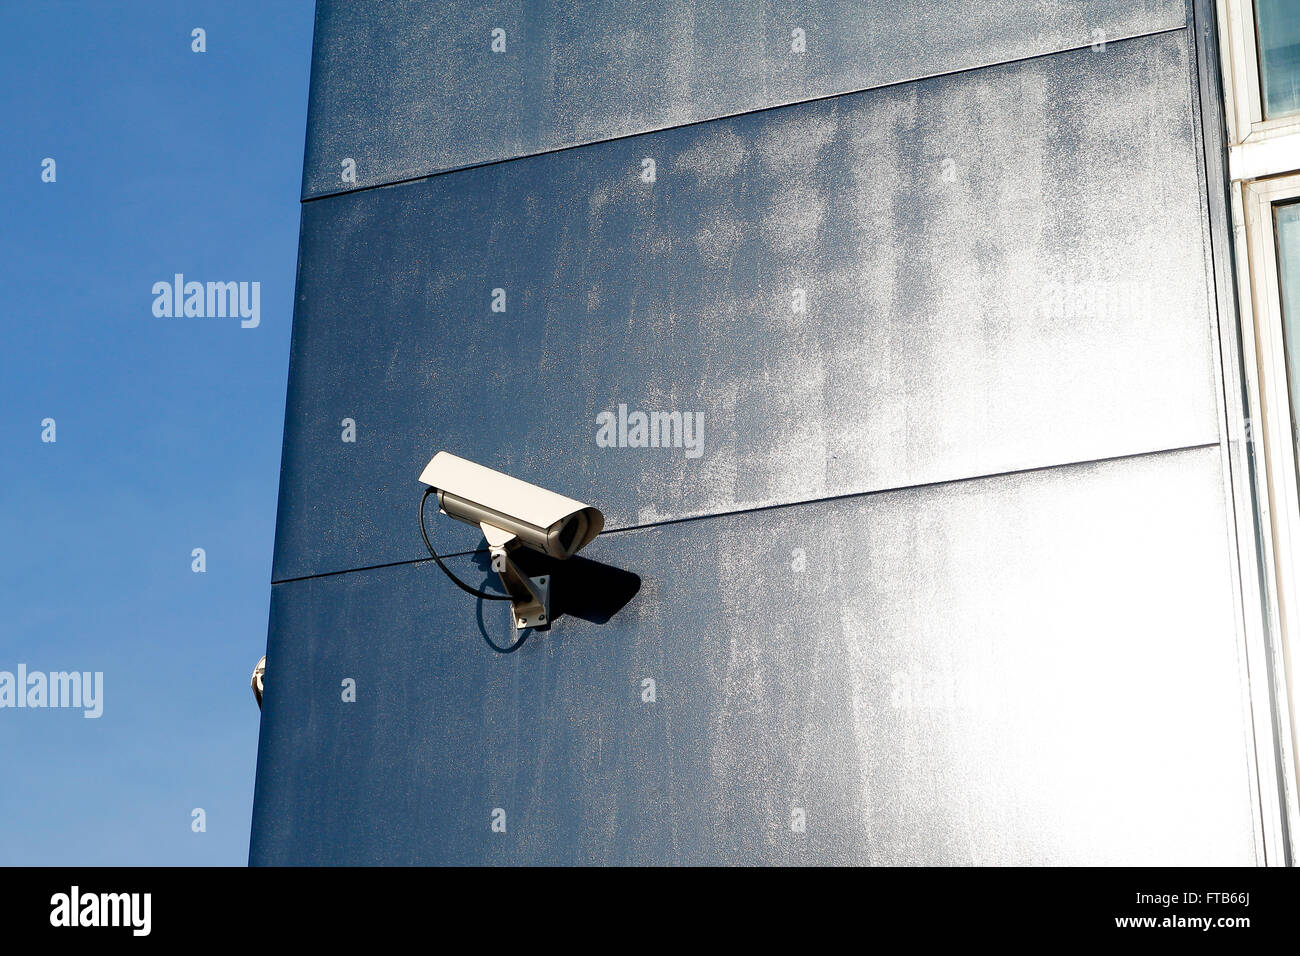 Security camera for video surveillance, outdoors Stock Photo